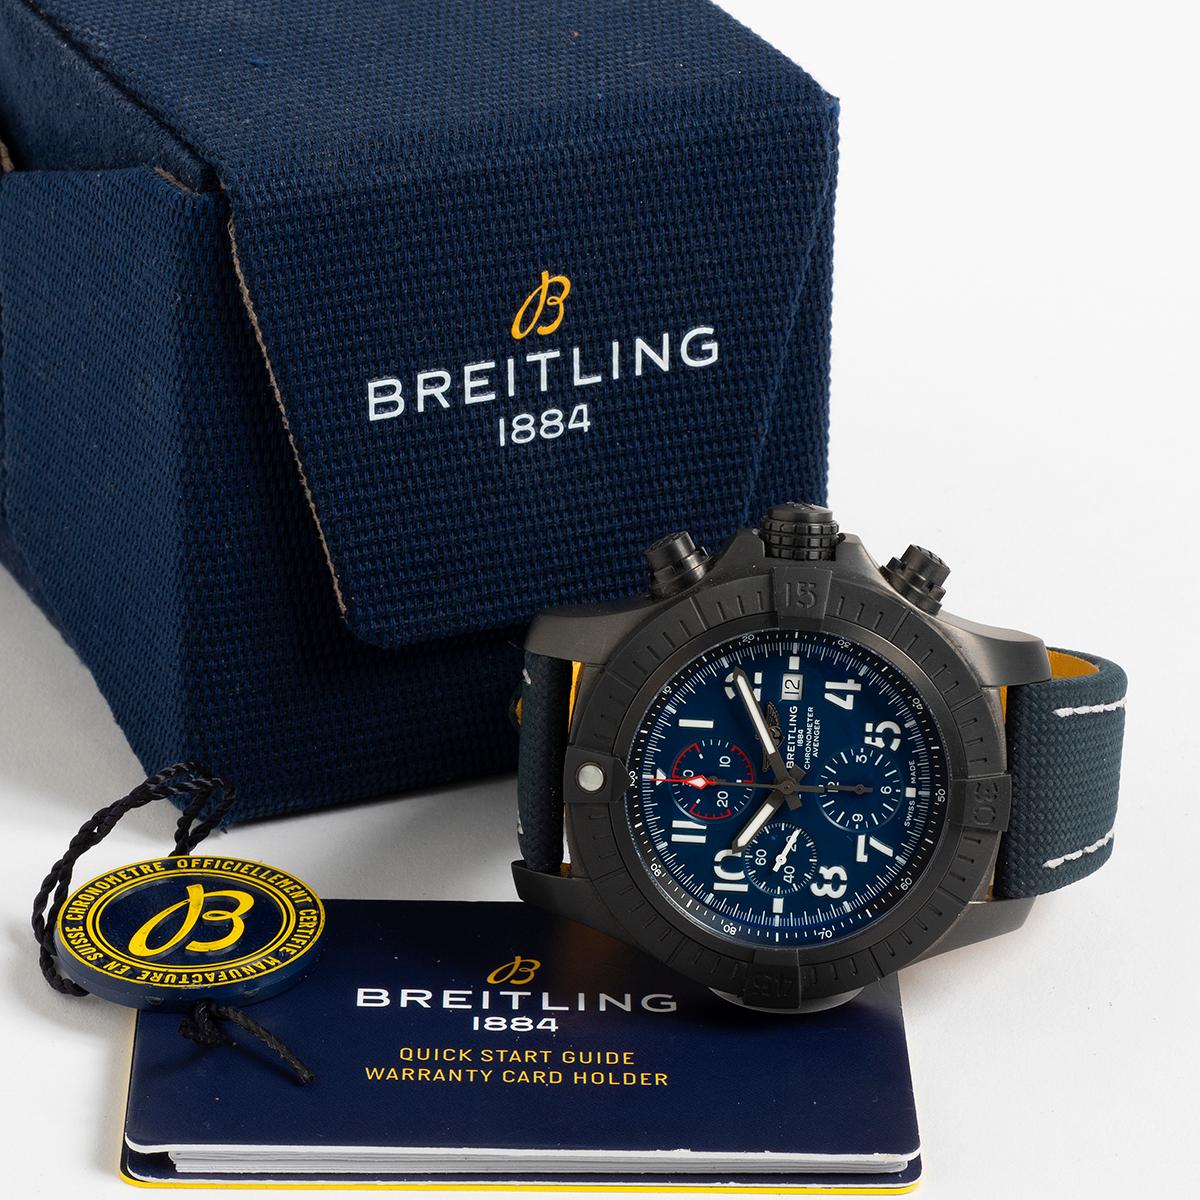 Our Breitling Super Avenger Chronograph Night Mission reference V13375 features a prominent 48mm case black steel with black/ yellow leather / rubber strap with tang buckle. Presented in outstanding condition with only light signs of use, to be